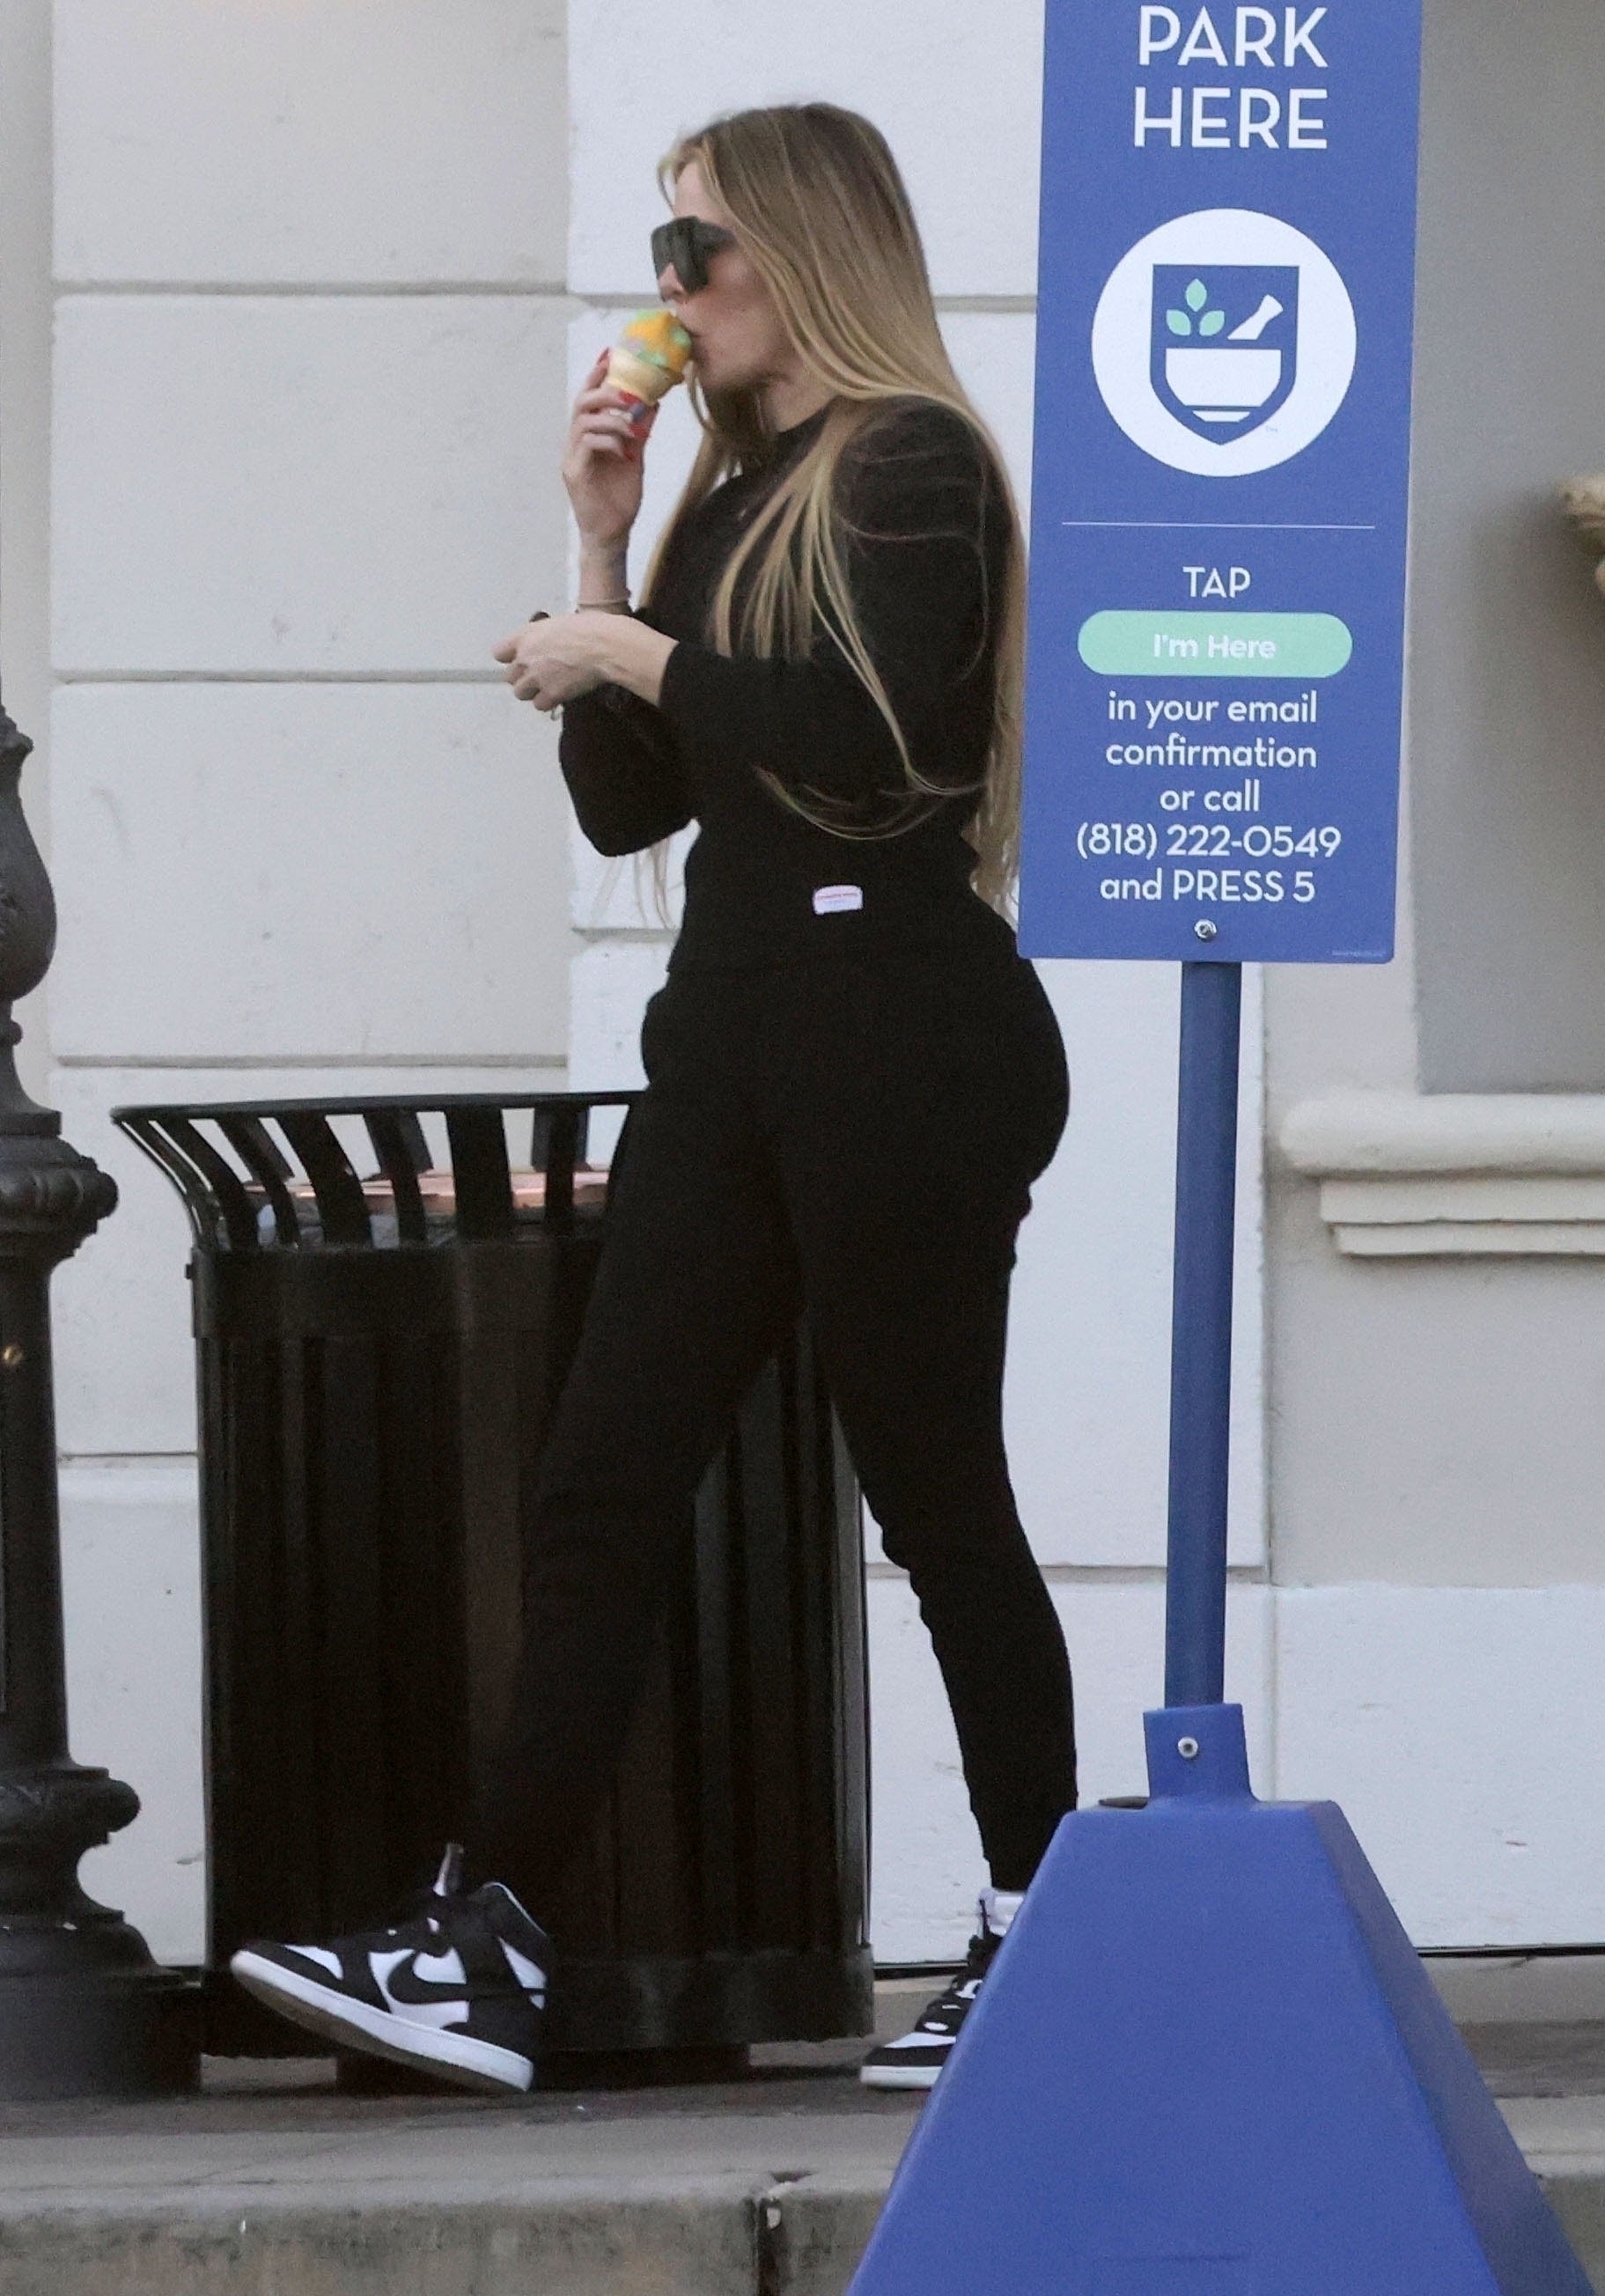 Khloe began losing weight after her ex Tristan Thompson's cheating scandal, with her family also expressing concern for her changed figure at the time